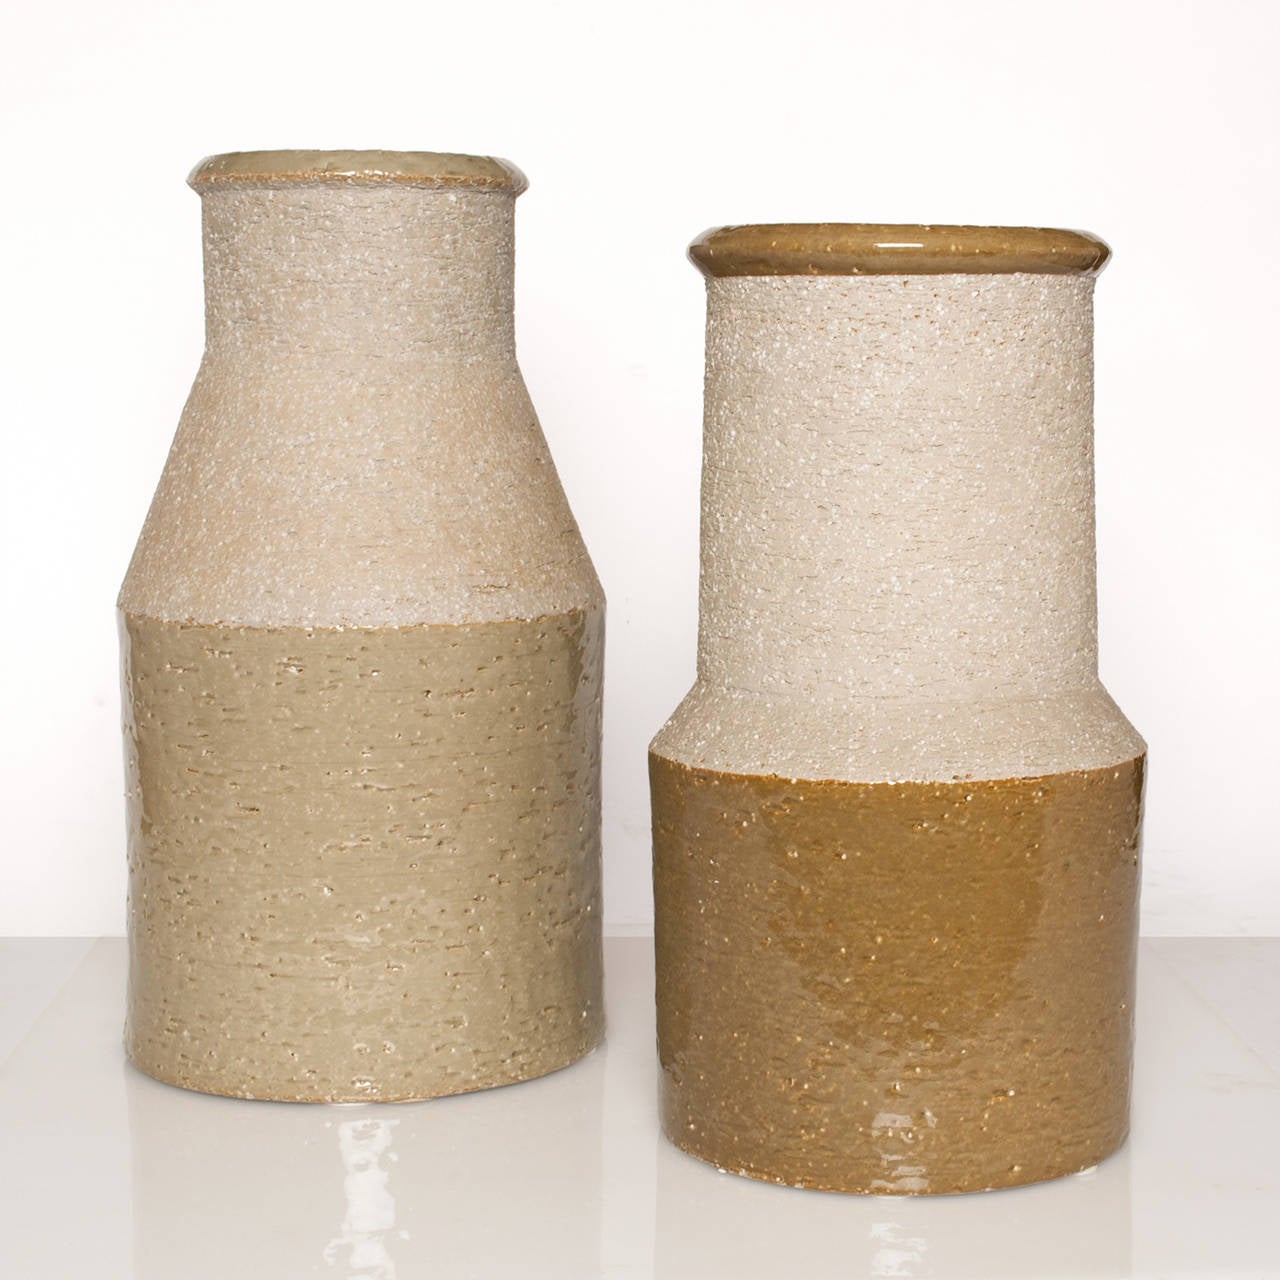 Large studio vases by Hertha Bengtsson for Rorstrand, Sweden. These vases use charmotte clay and were designed circa 1962.
 
H: 17